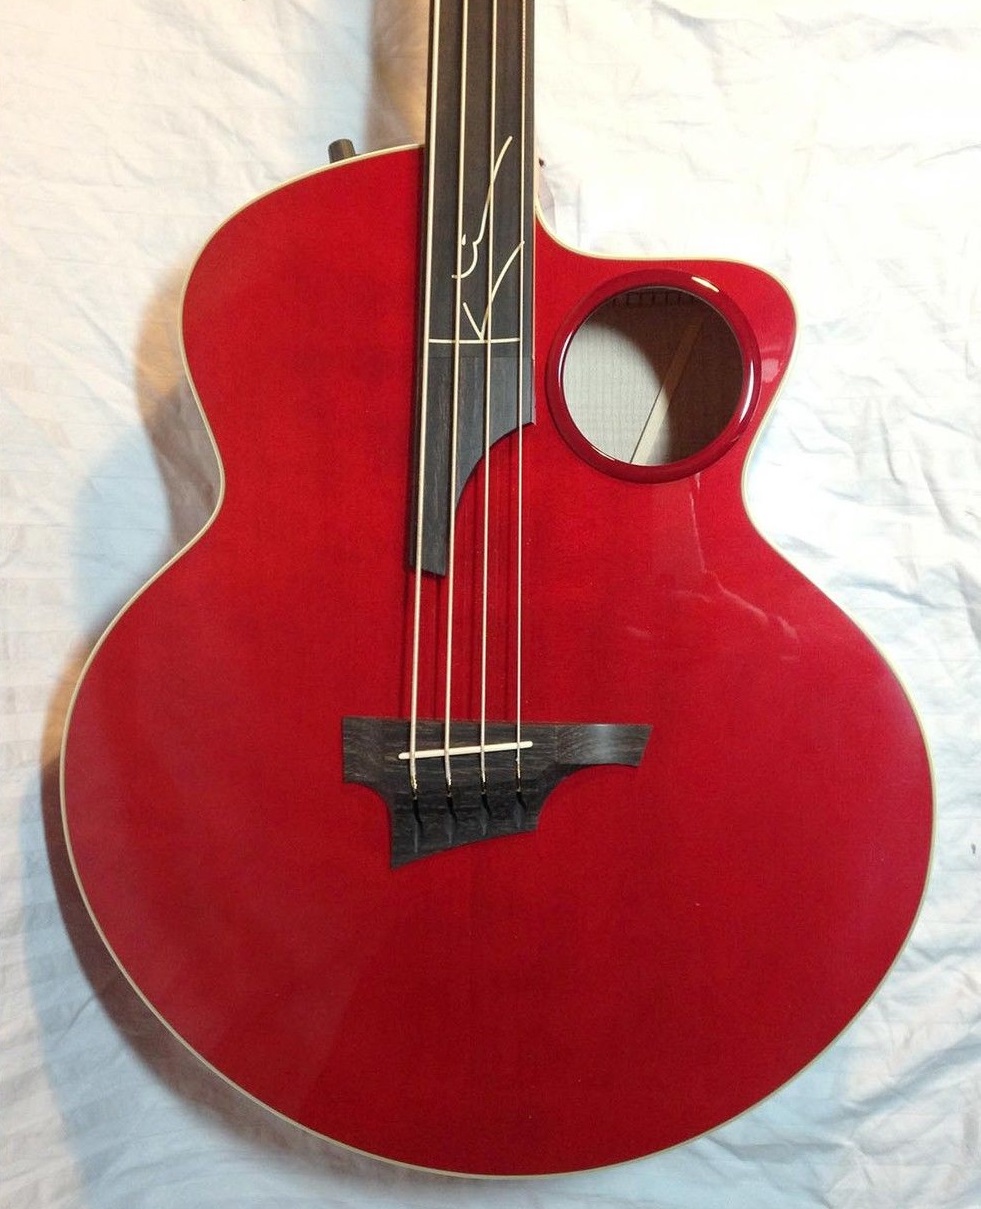 A red electric and steel string acoustic guitar